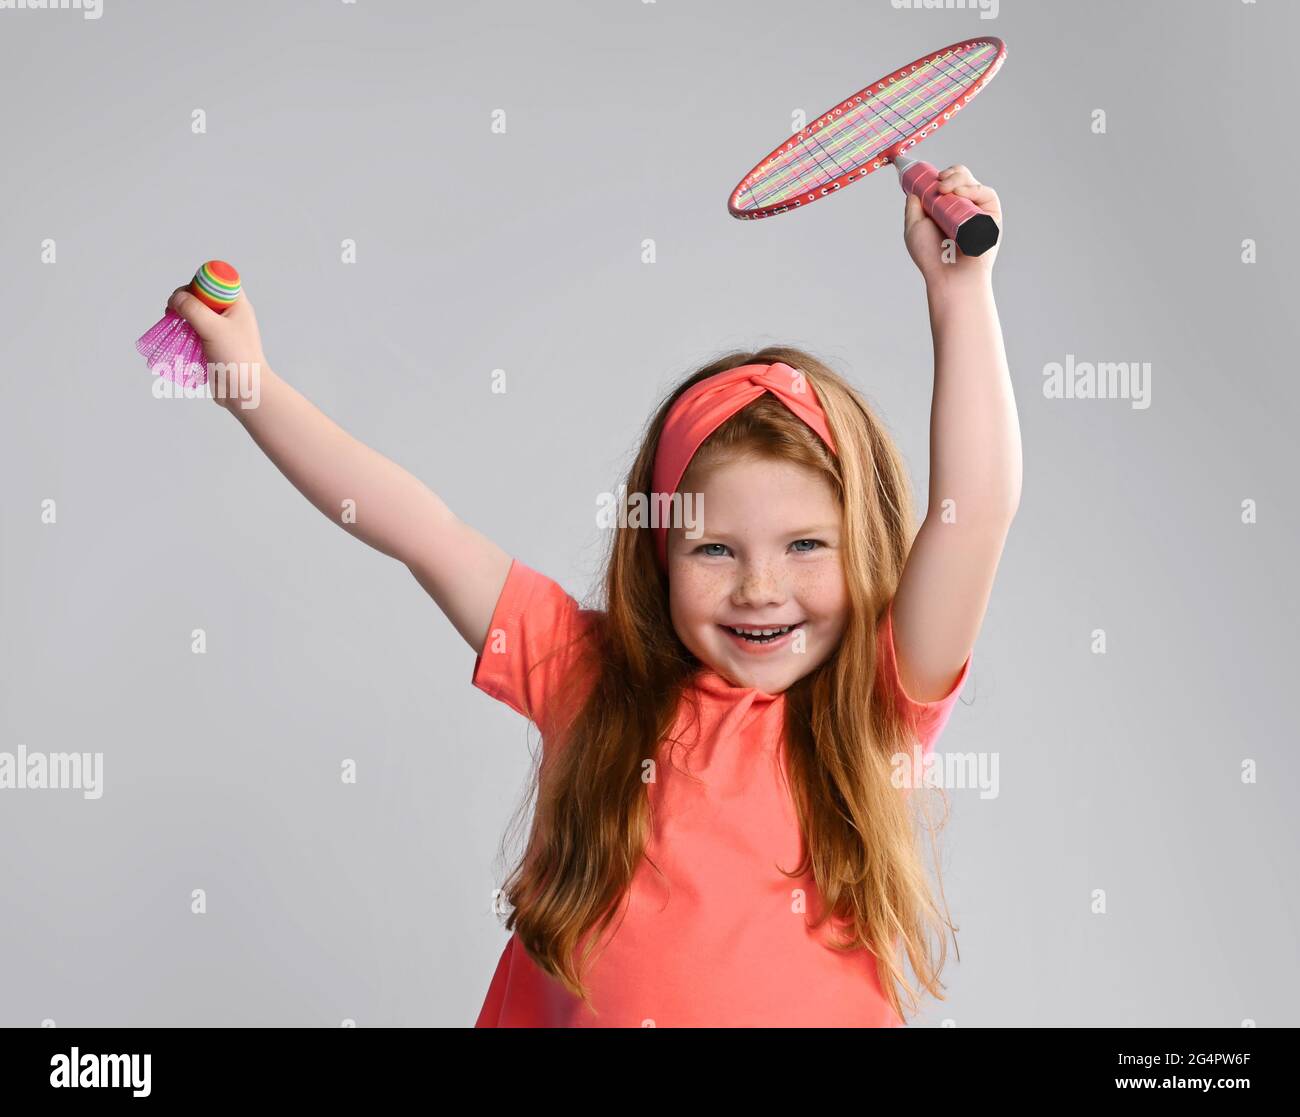 Happy active red-haired kid girl in pink t-shirt and headband holds a badminton racquet and shuttlecock in hands up Stock Photo